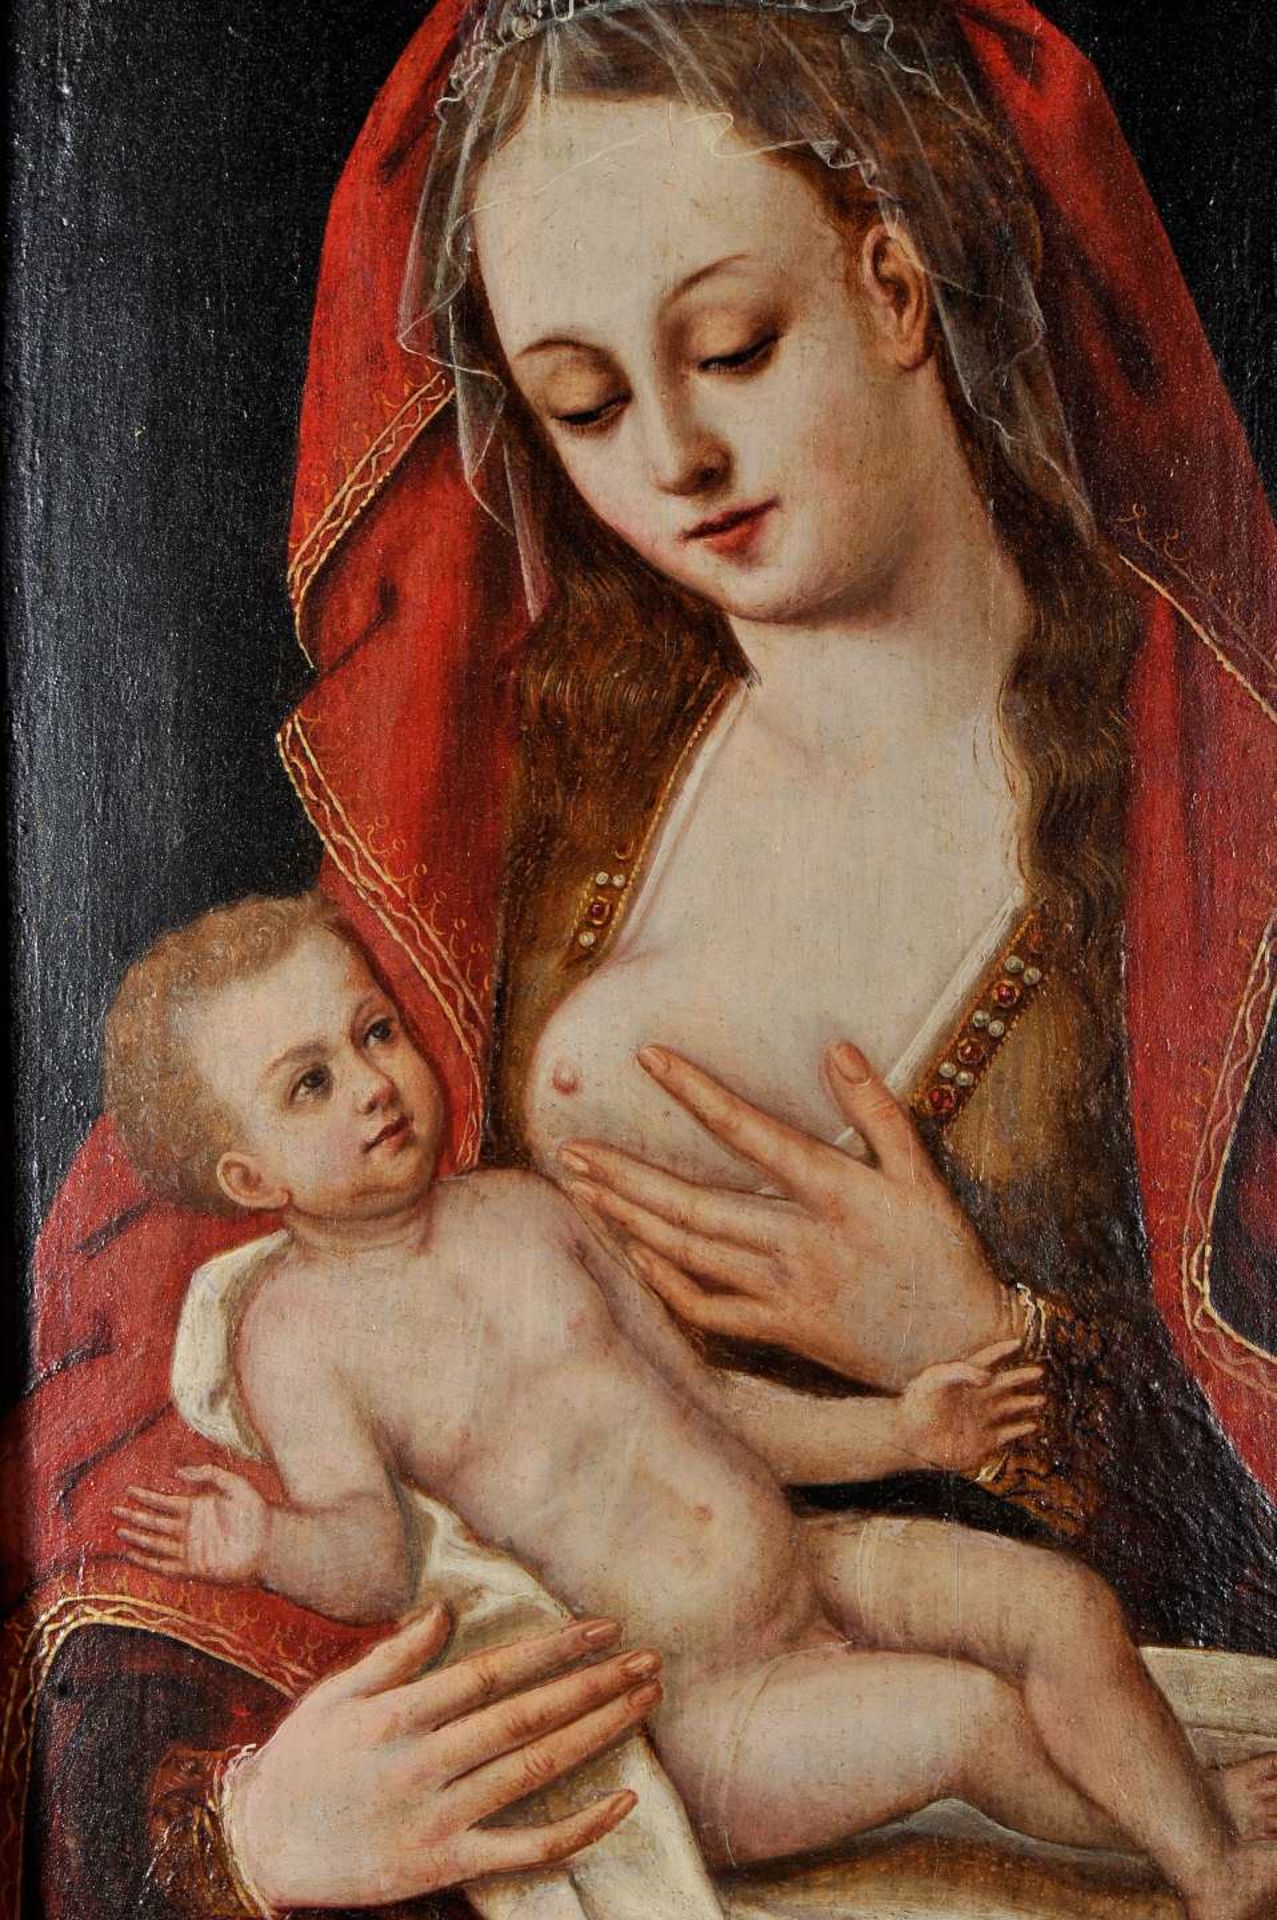 Our Lady of the Milk - Image 2 of 2